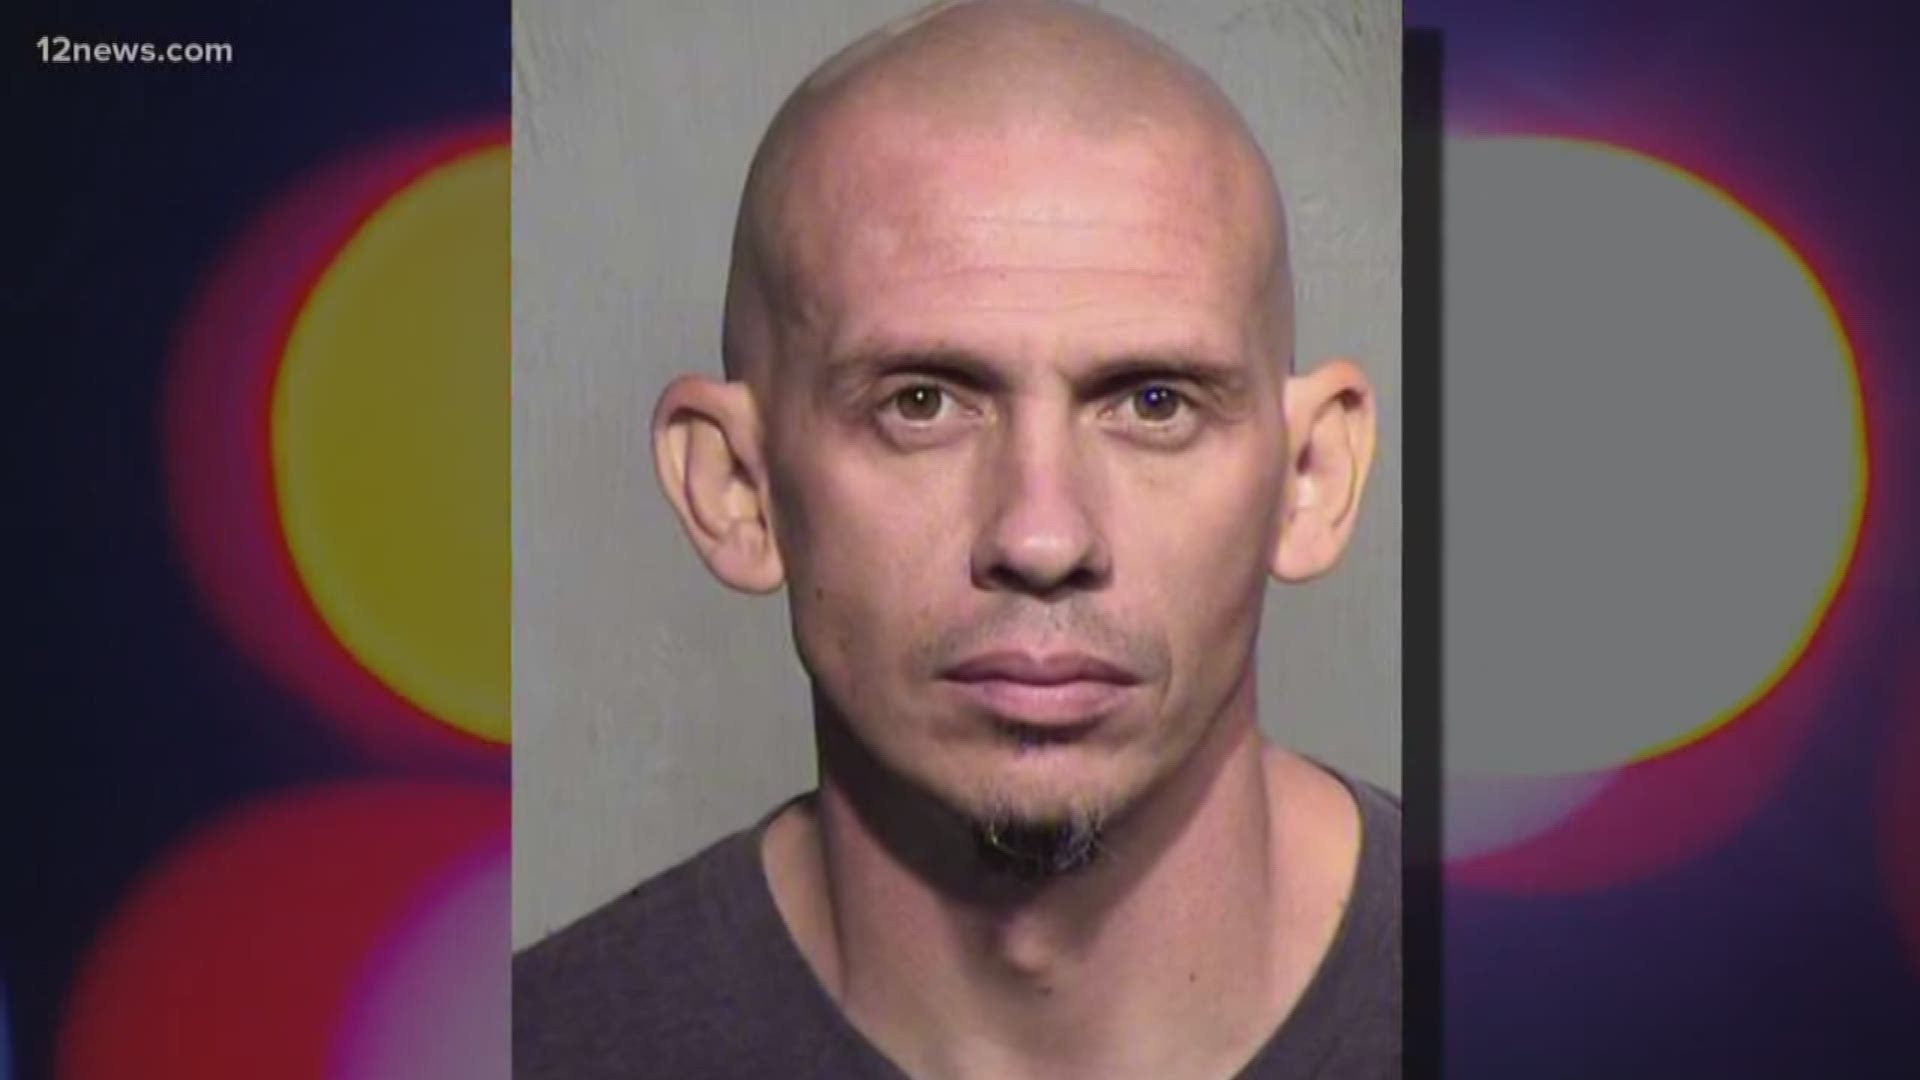 Man allegedly impregnated at least 1 of girlfriends teen daughters, MCSO says 12news picture